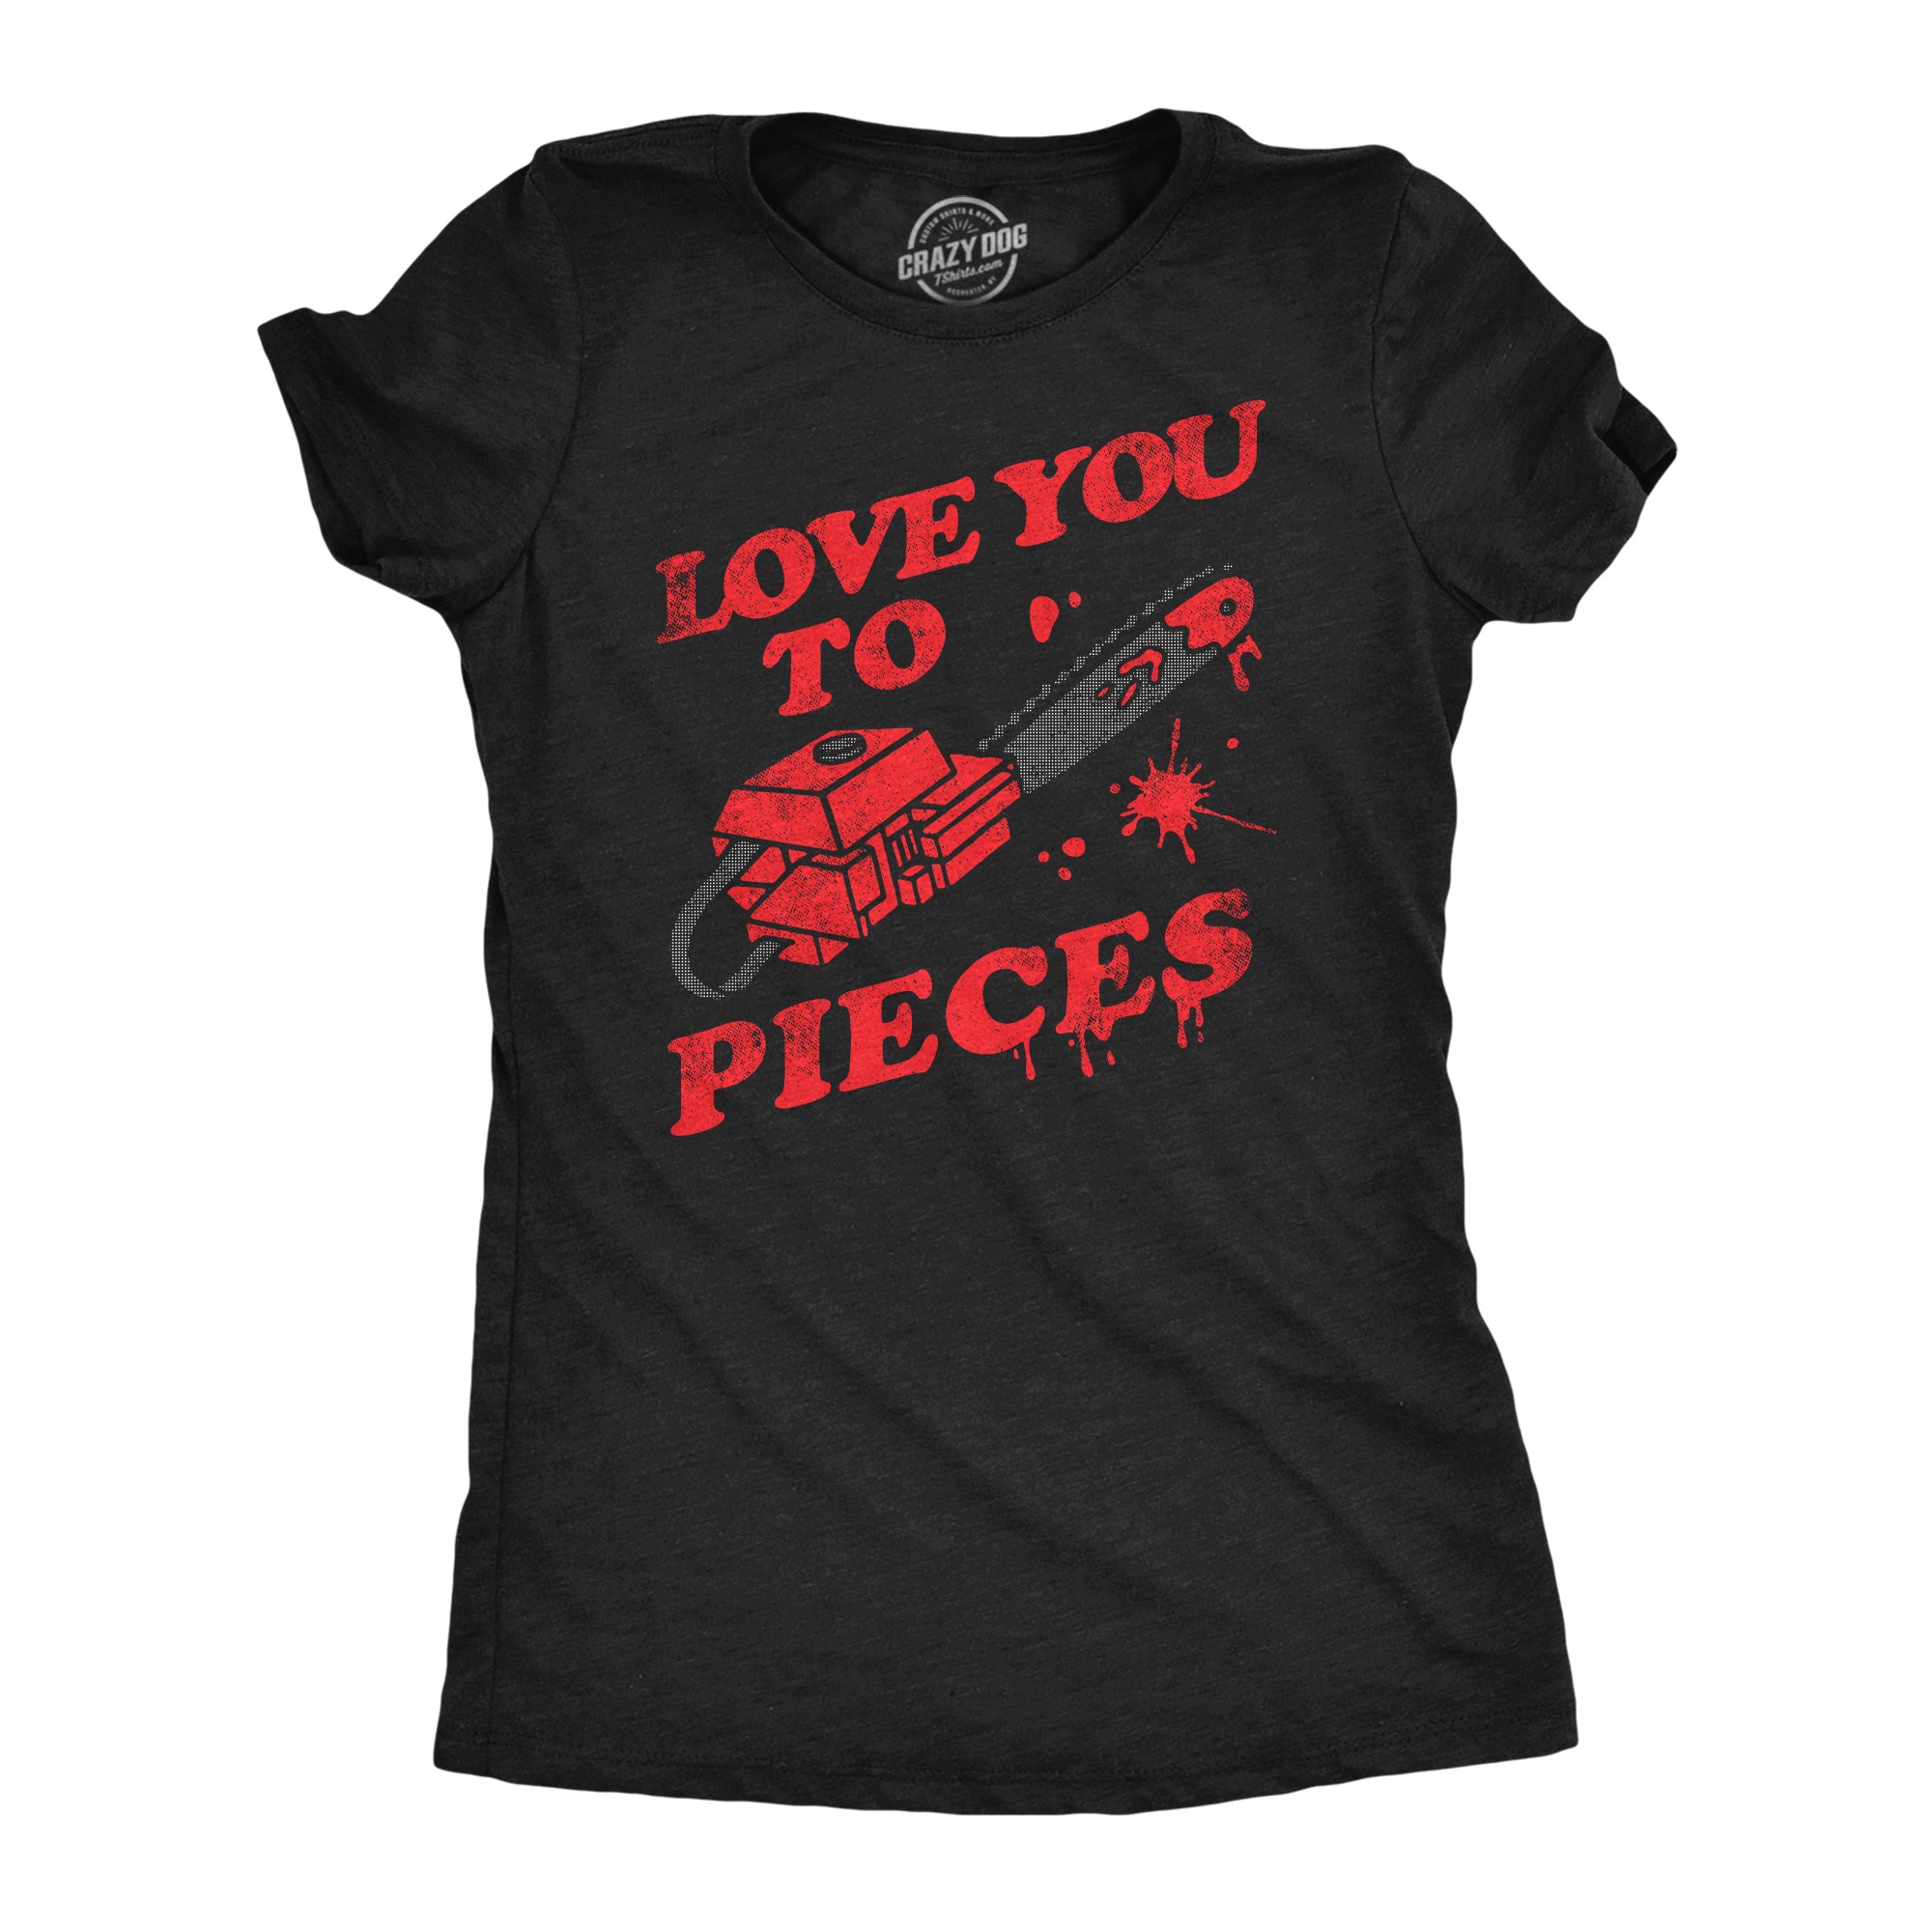 Funny Heather Black - Love You To Pieces Love You To Pieces Womens T Shirt Nerdy Valentine's Day Sarcastic Tee